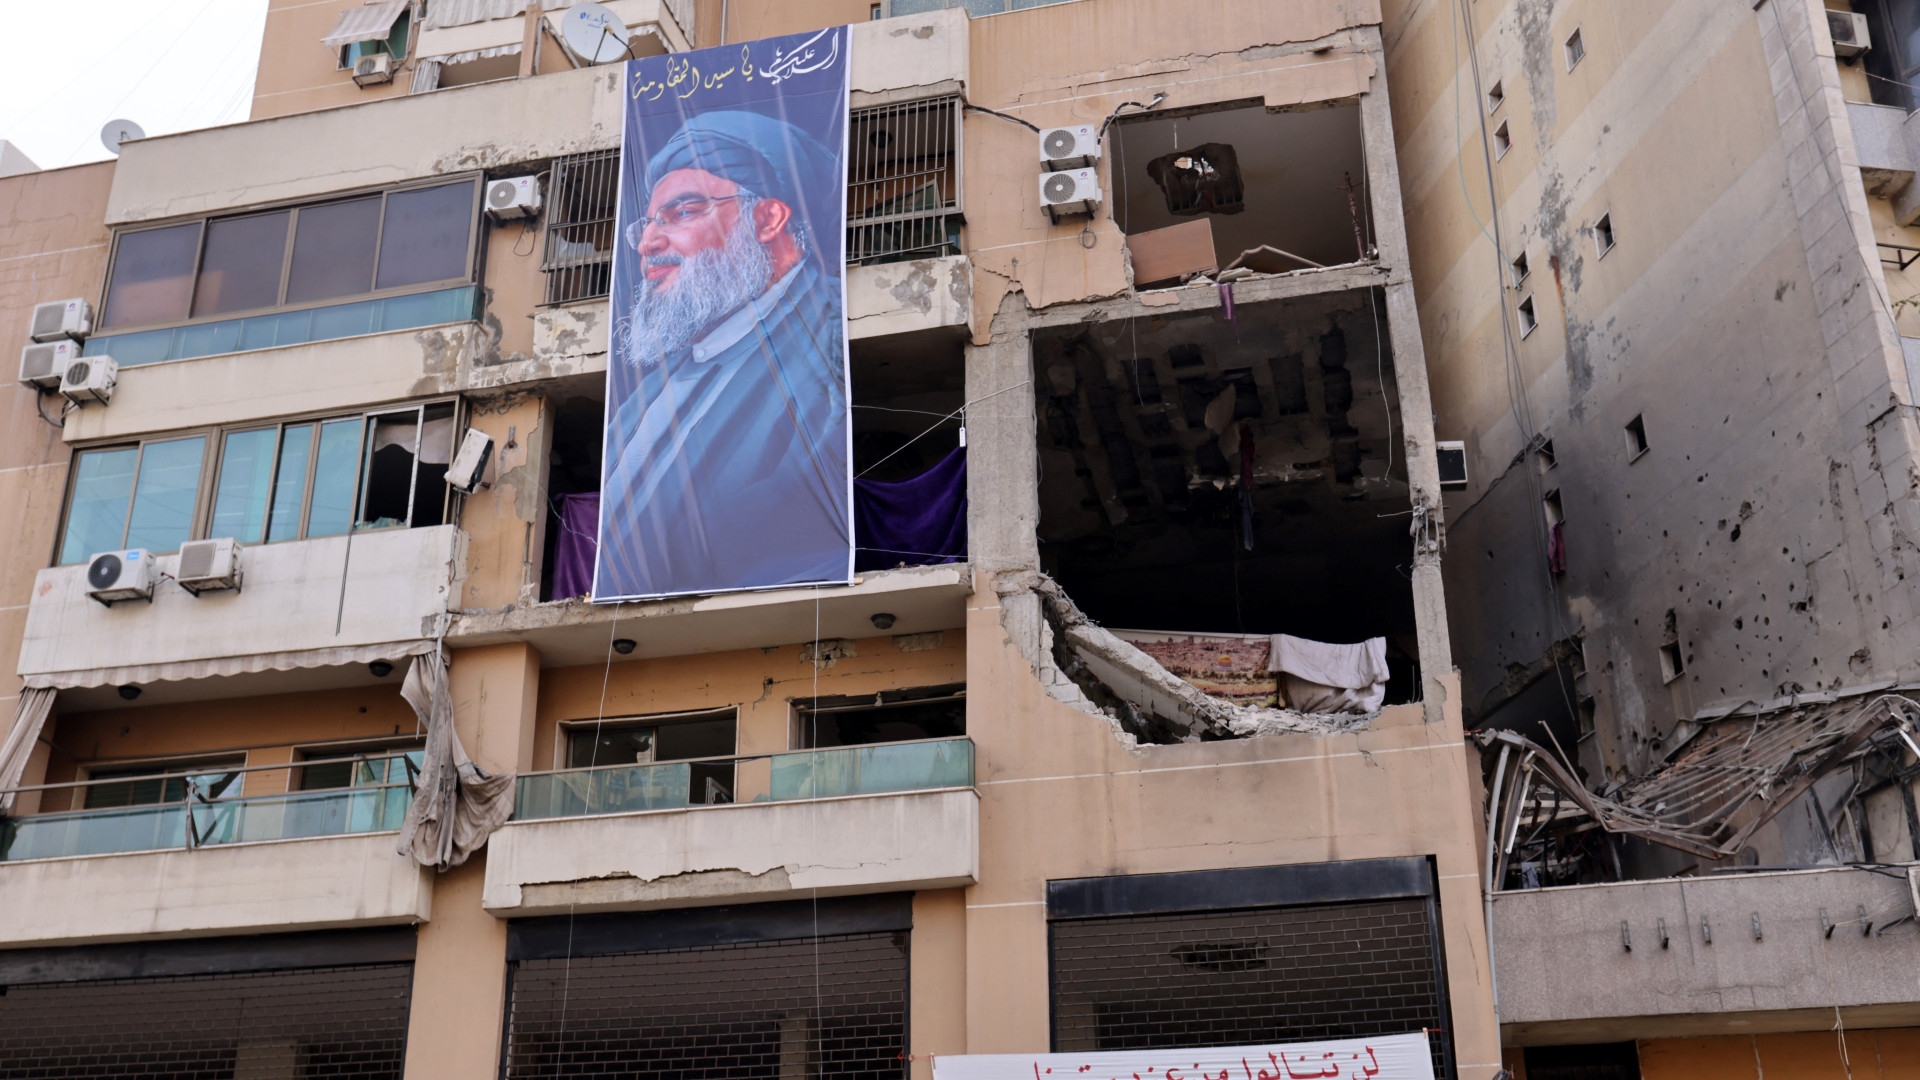 In a photo taken on 8 January, a banner depicting Hezbollah leader Hassan Nasrallah hangs on a building in which Hamas number two, Saleh al-Arouri, was assassinated in an Israeli drone strike in southern Beirut on 2 January (Anwar Amro/AFP)